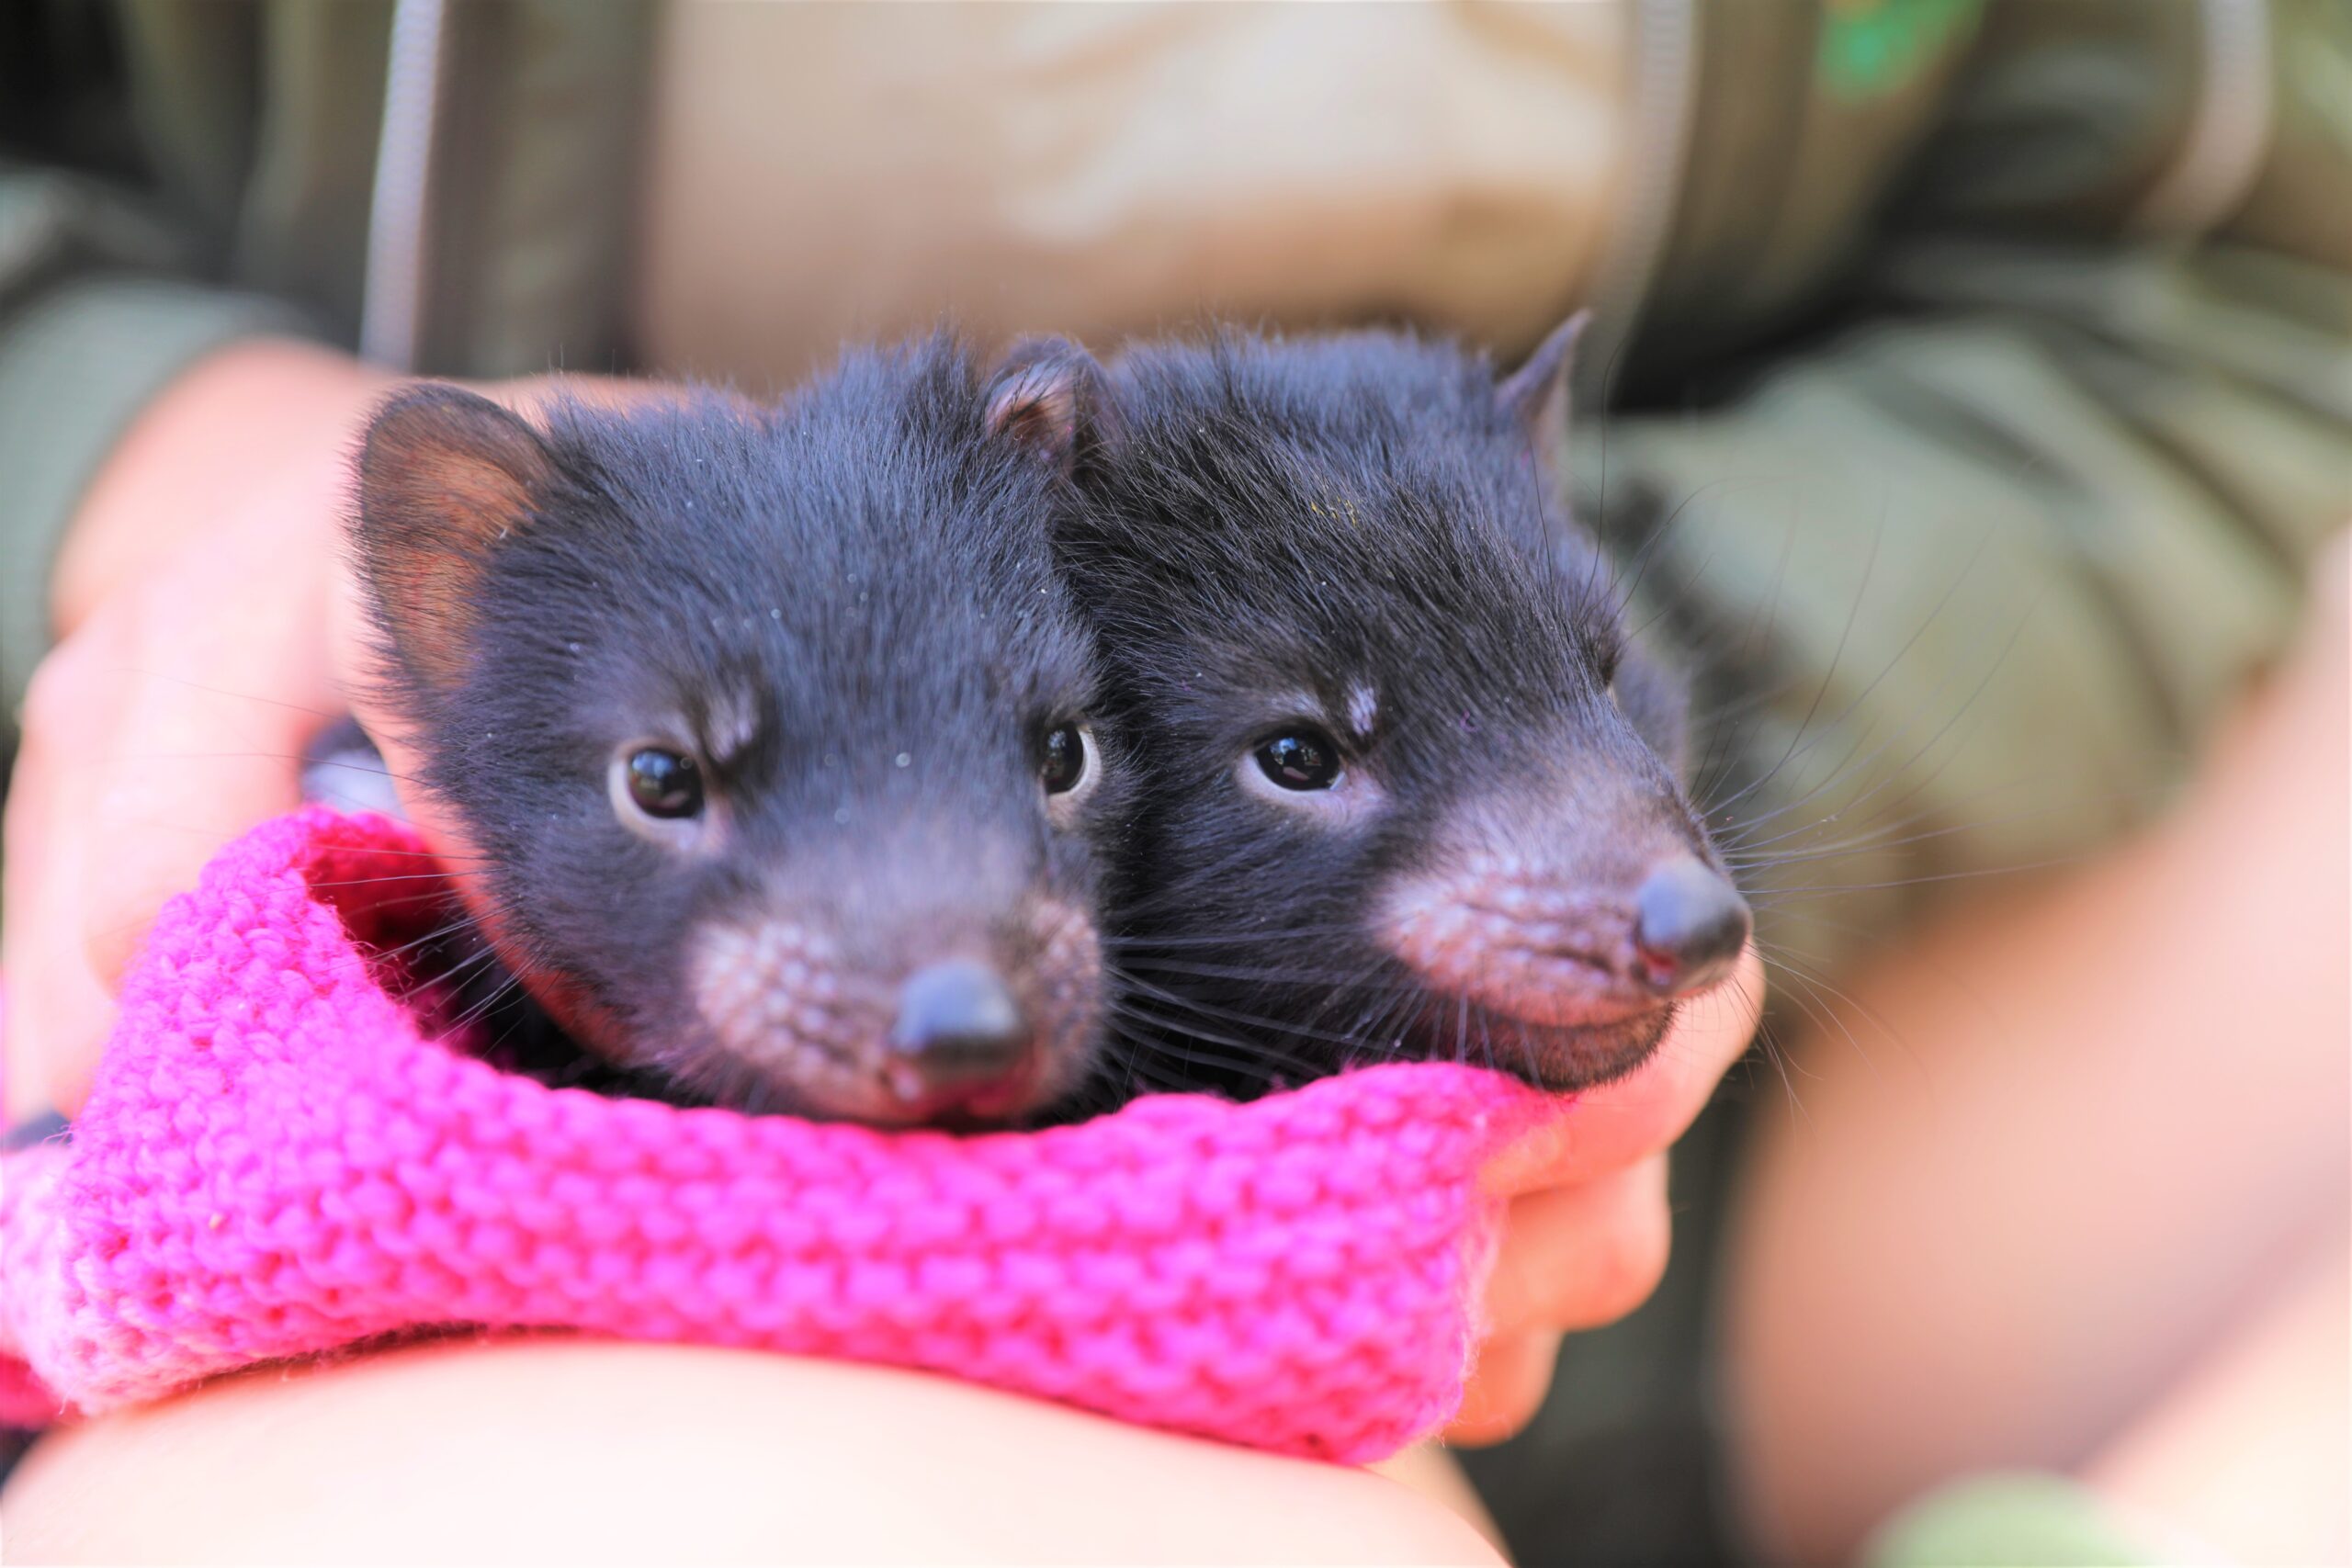 two baby tasmanian devils poke their heads out of a pink blanket held in someone's hands